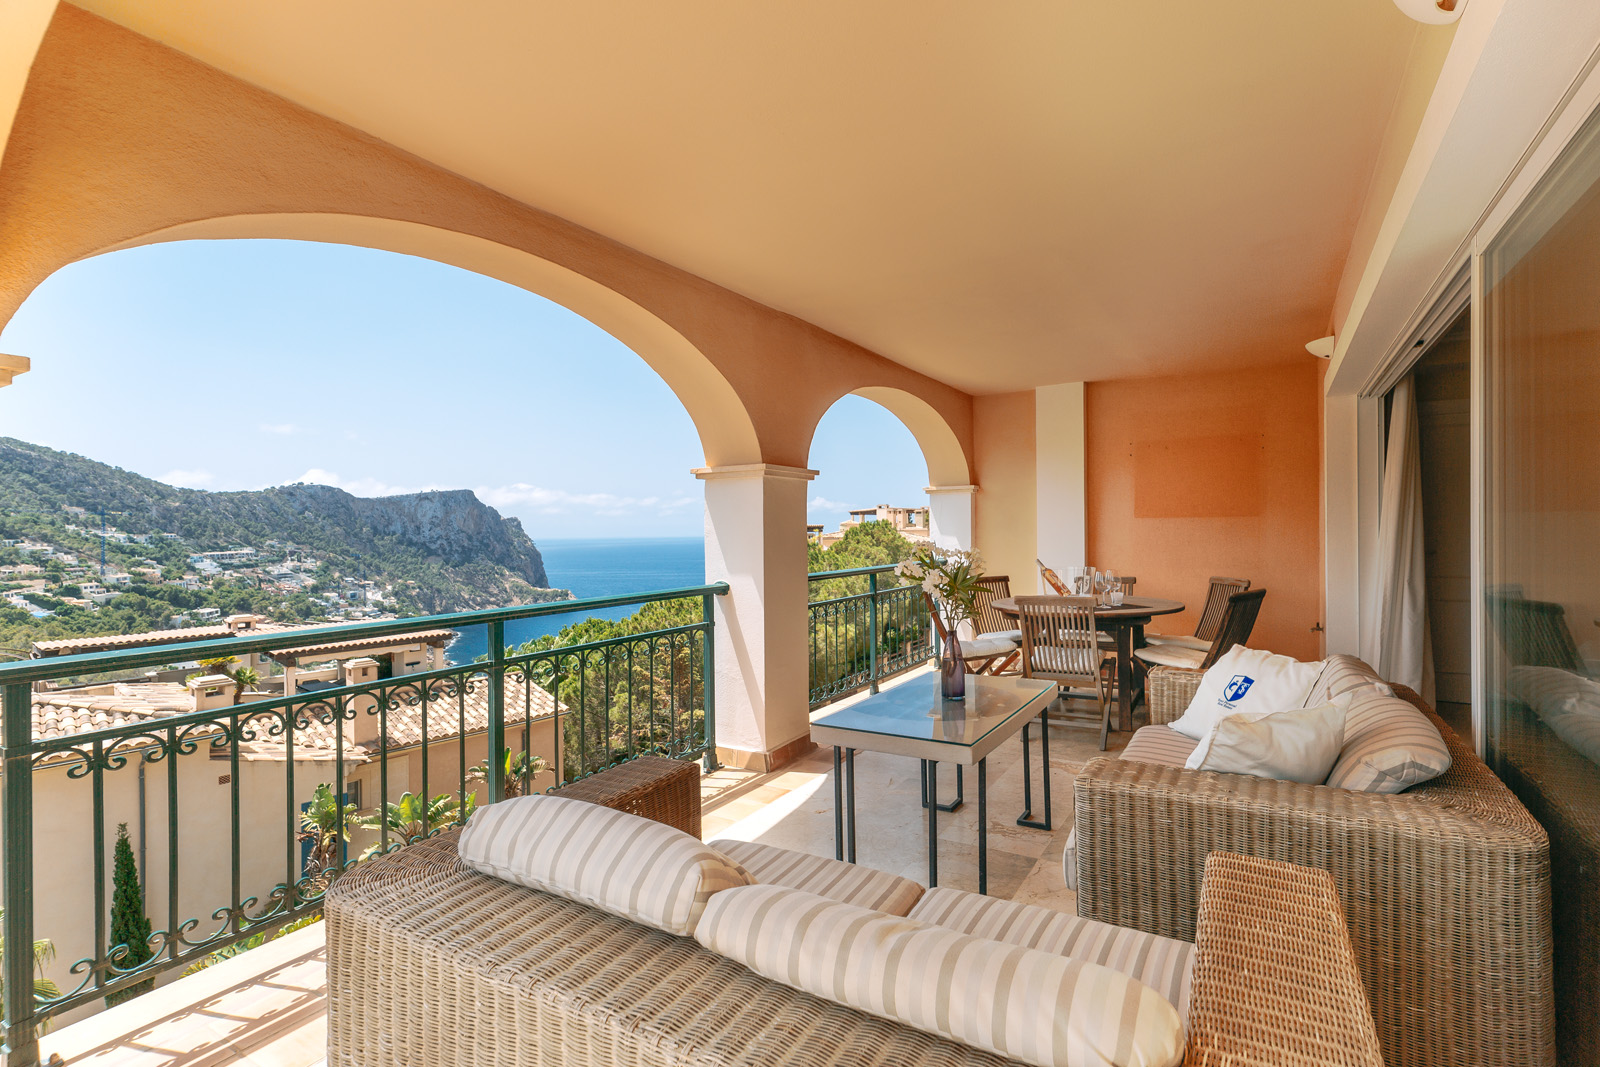 RENTAL! Port Andratx: Top sea view apartment in a privileged location